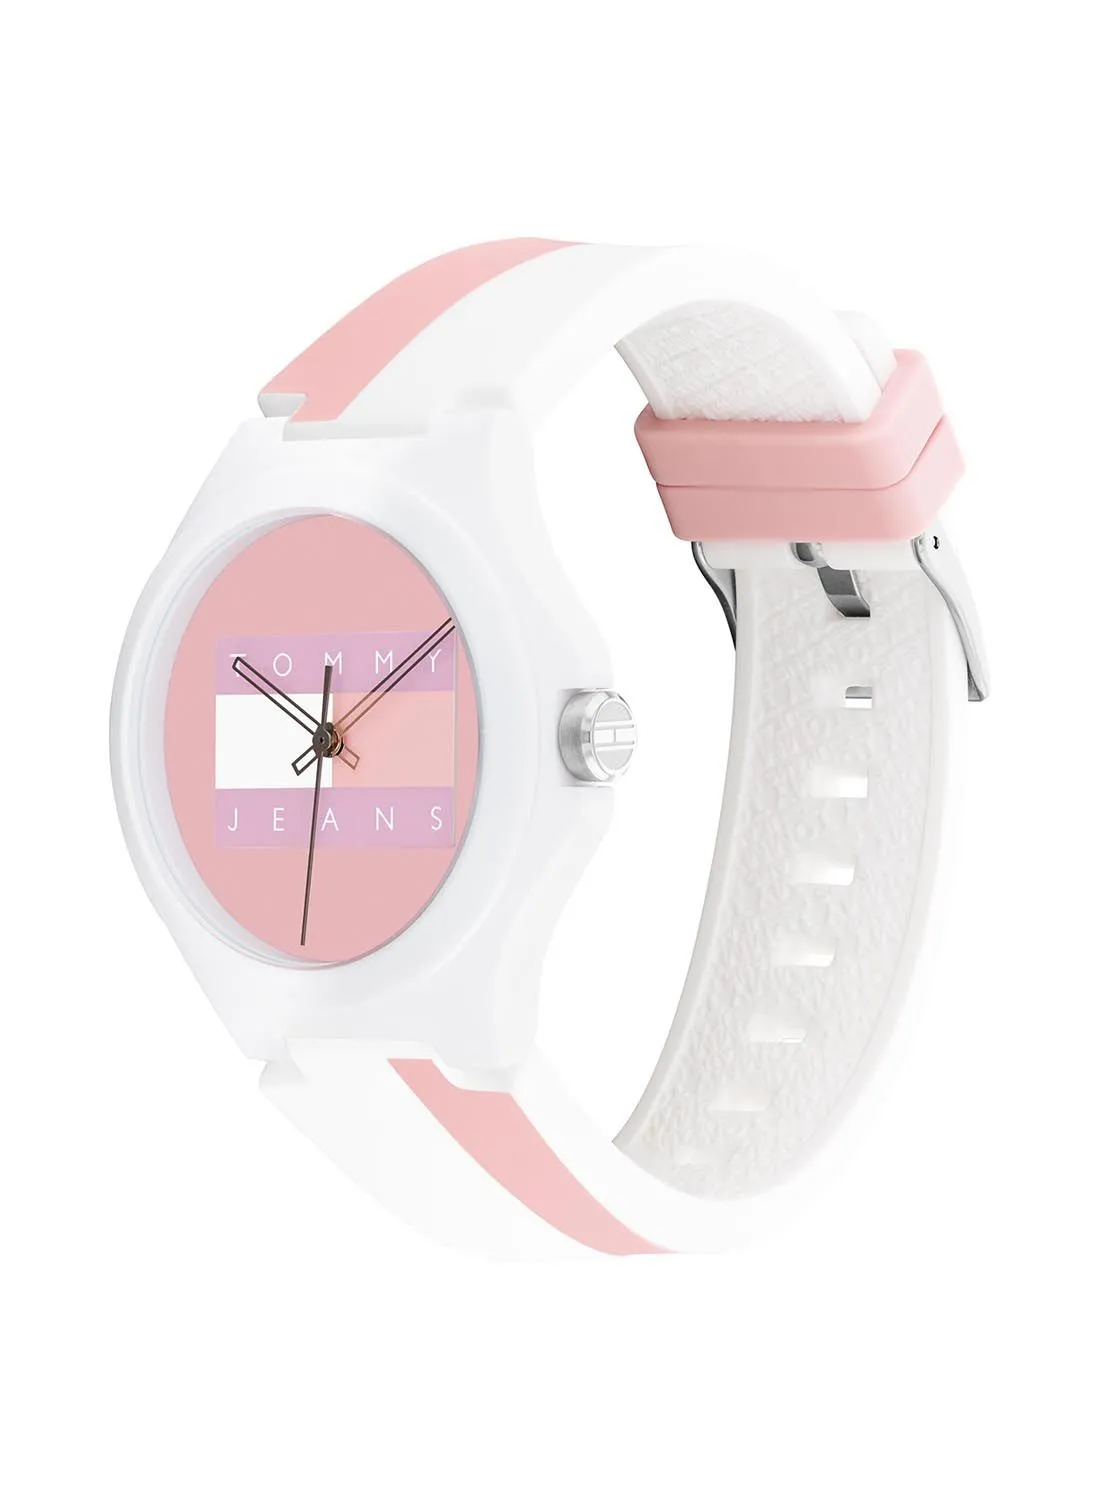 TOMMY HILFIGER TOMMY HILFIGER BERLIN UNISEX's PINK DIAL, WHITE & PINK SILICONE WATCH - 1720026